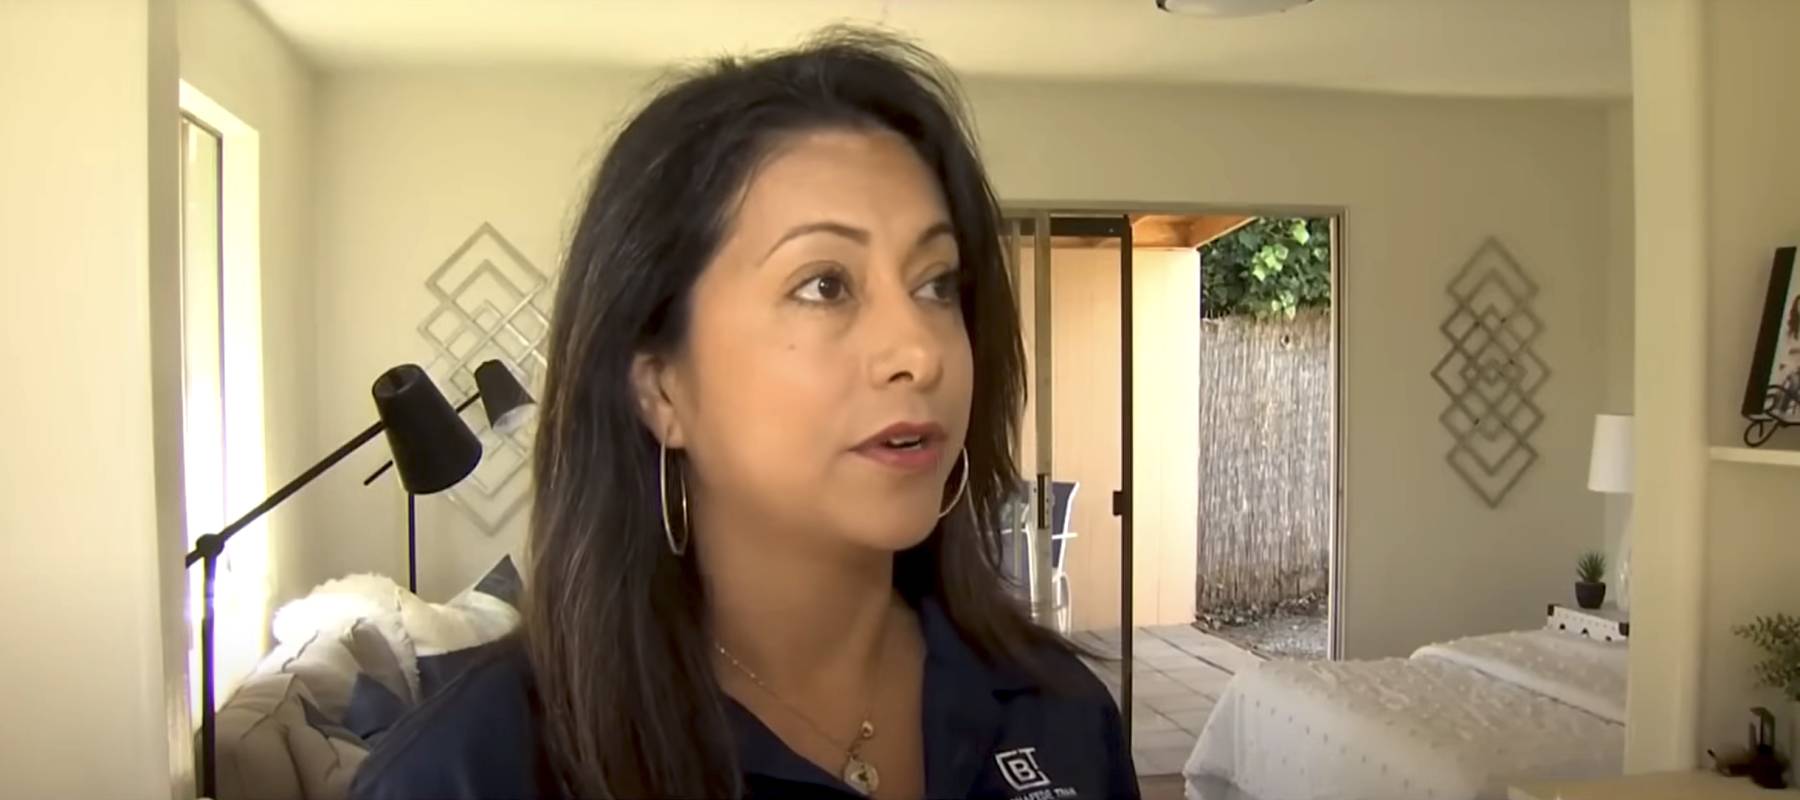 Real estate agent Faviola Perez speaks with NBC Bay Area about the tiny home listed in Cupertino, California.